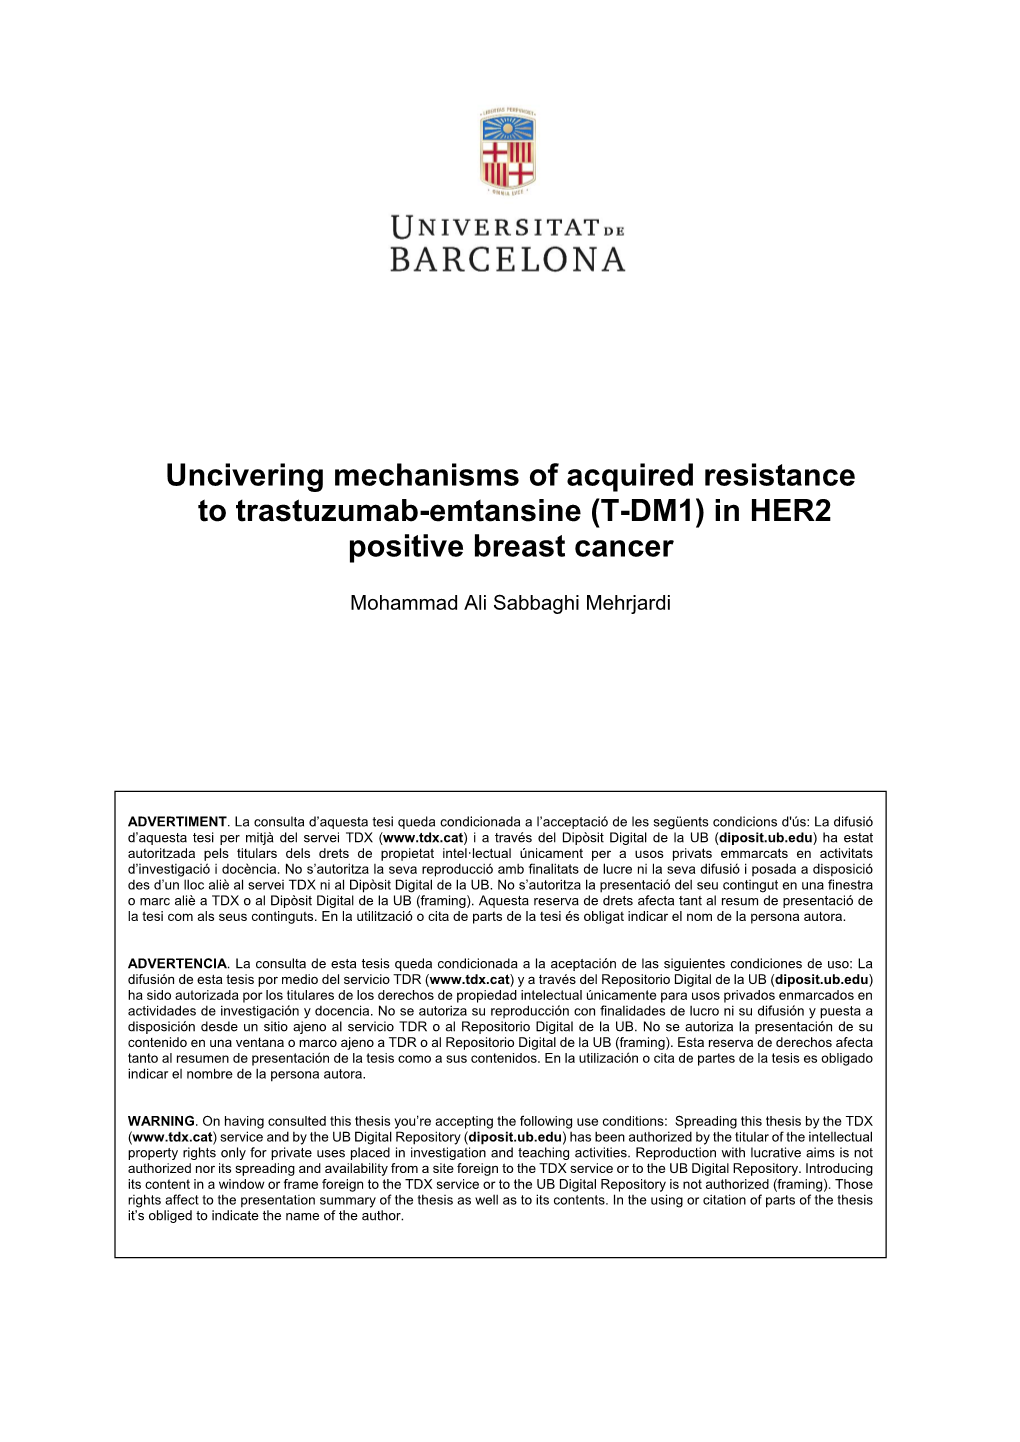 (T-DM1) in HER2 Positive Breast Cancer